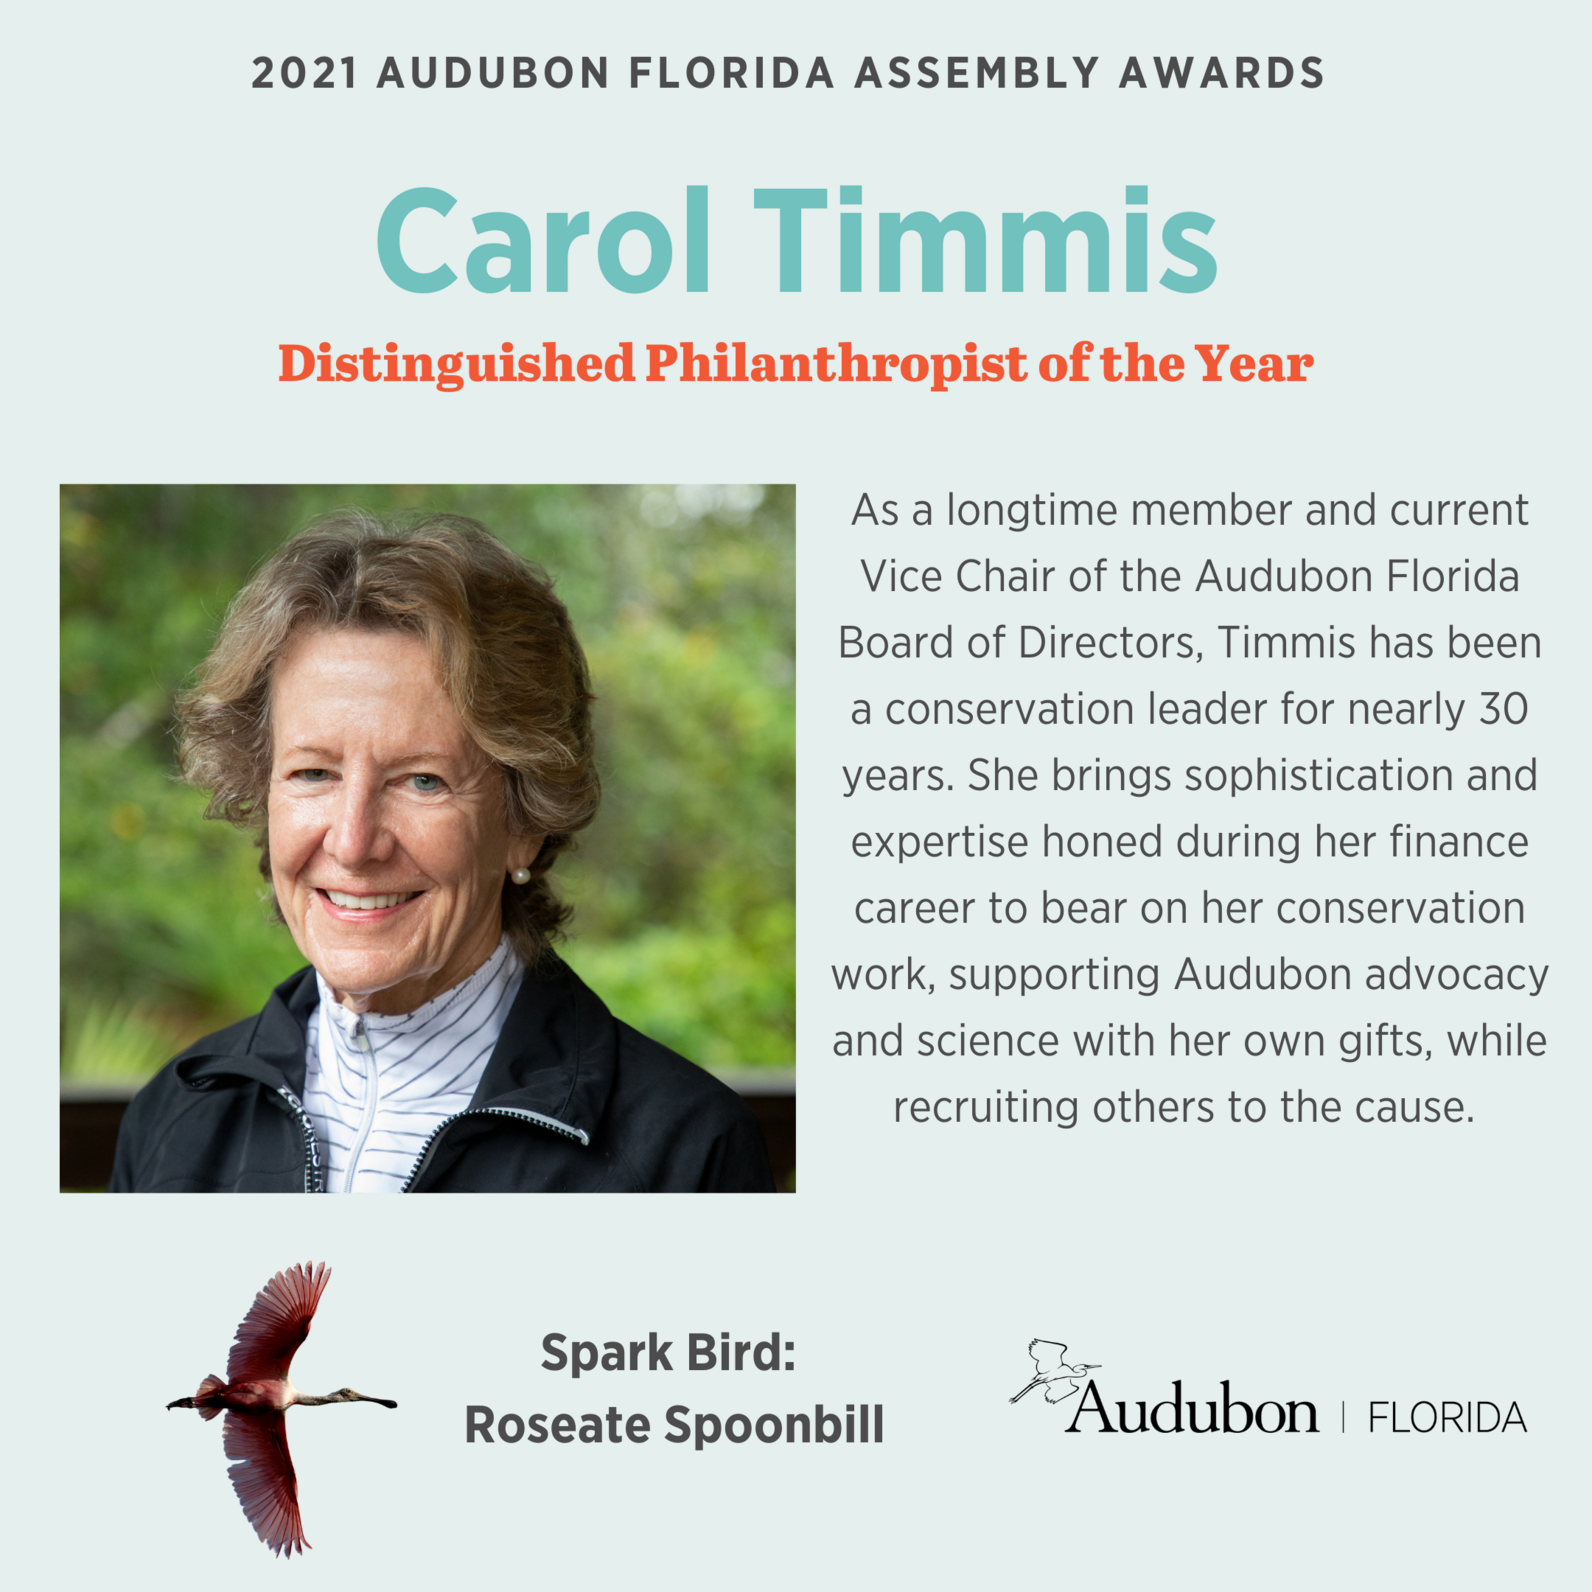 Graphic of Carol Timmis with her favorite bird - a Roseate Spoonbill - and repeated language from the article about why he won the award.